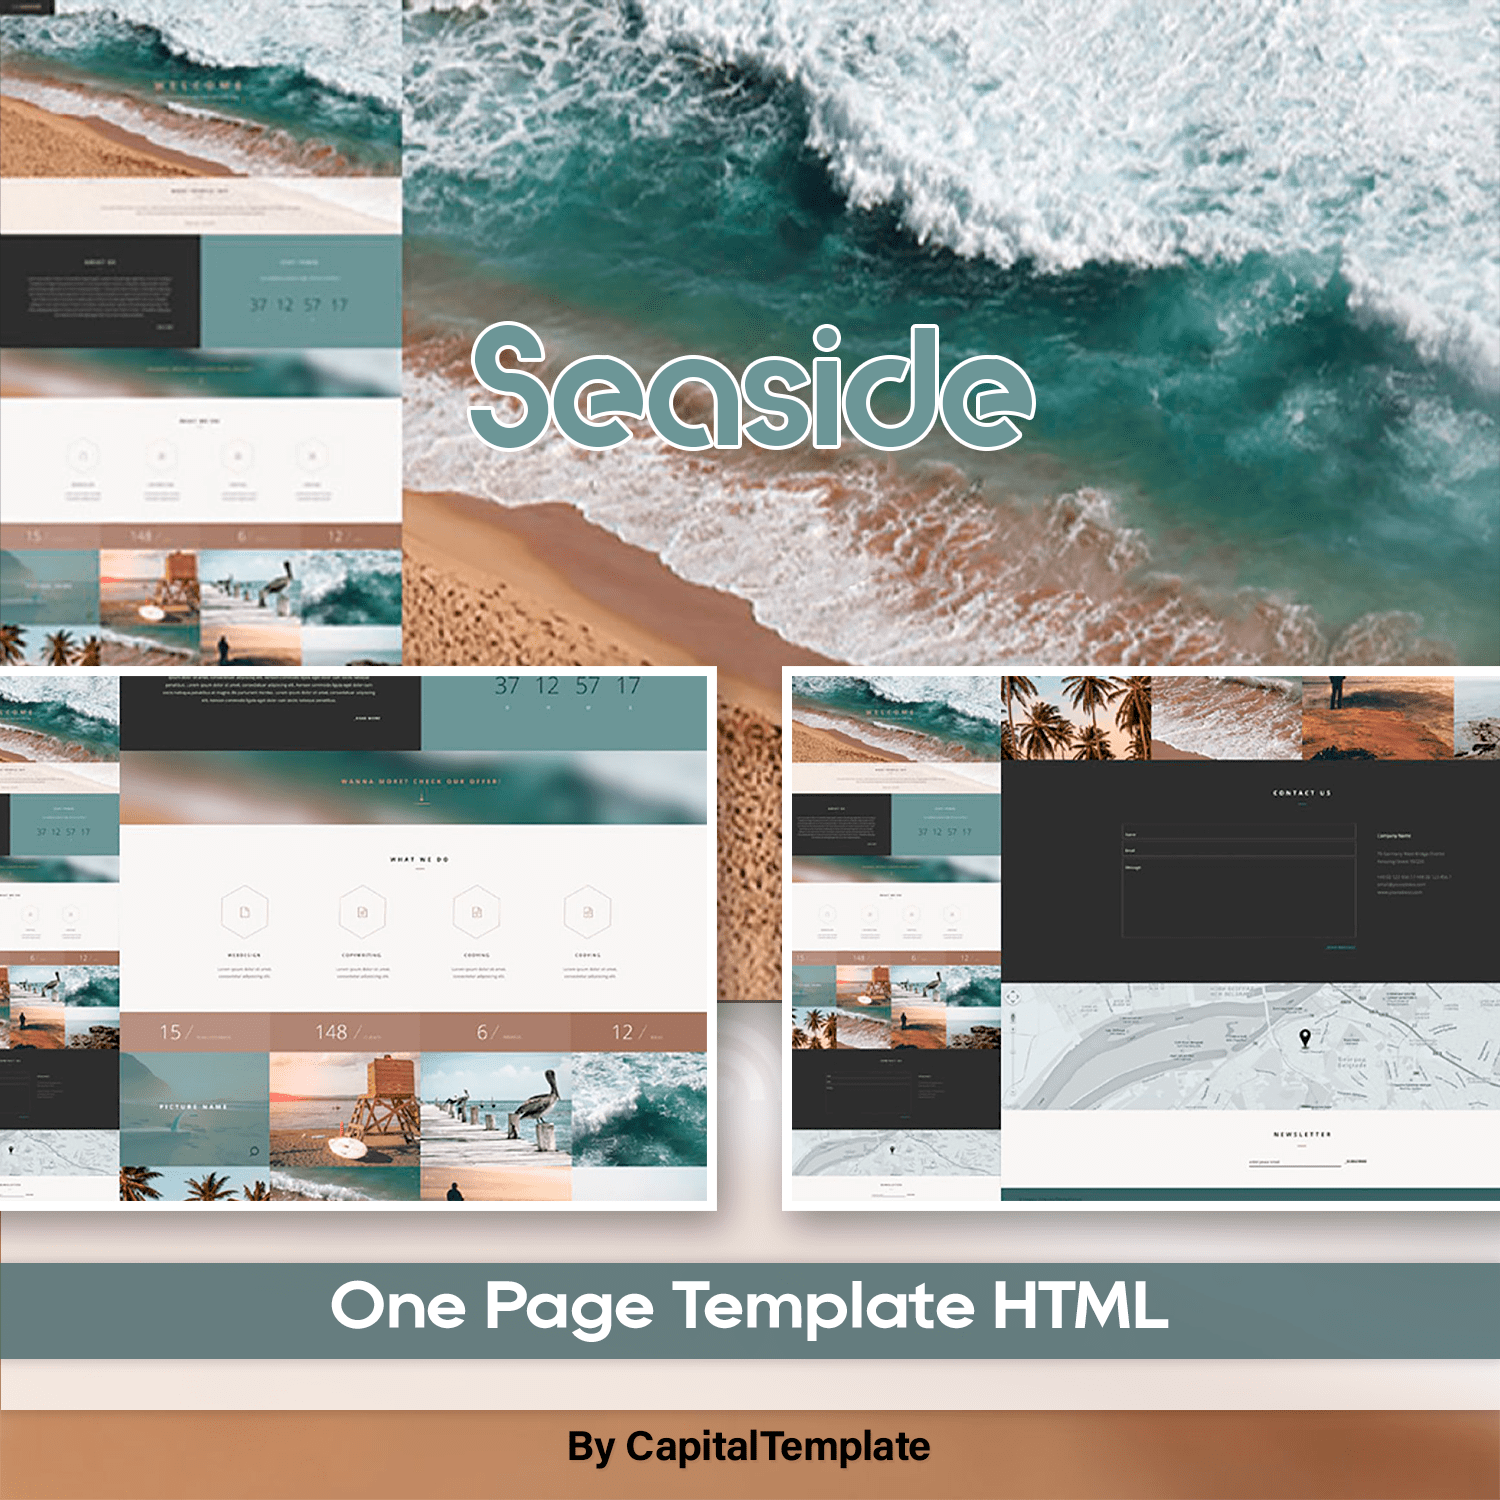 Seaside - One Page Template HTML.